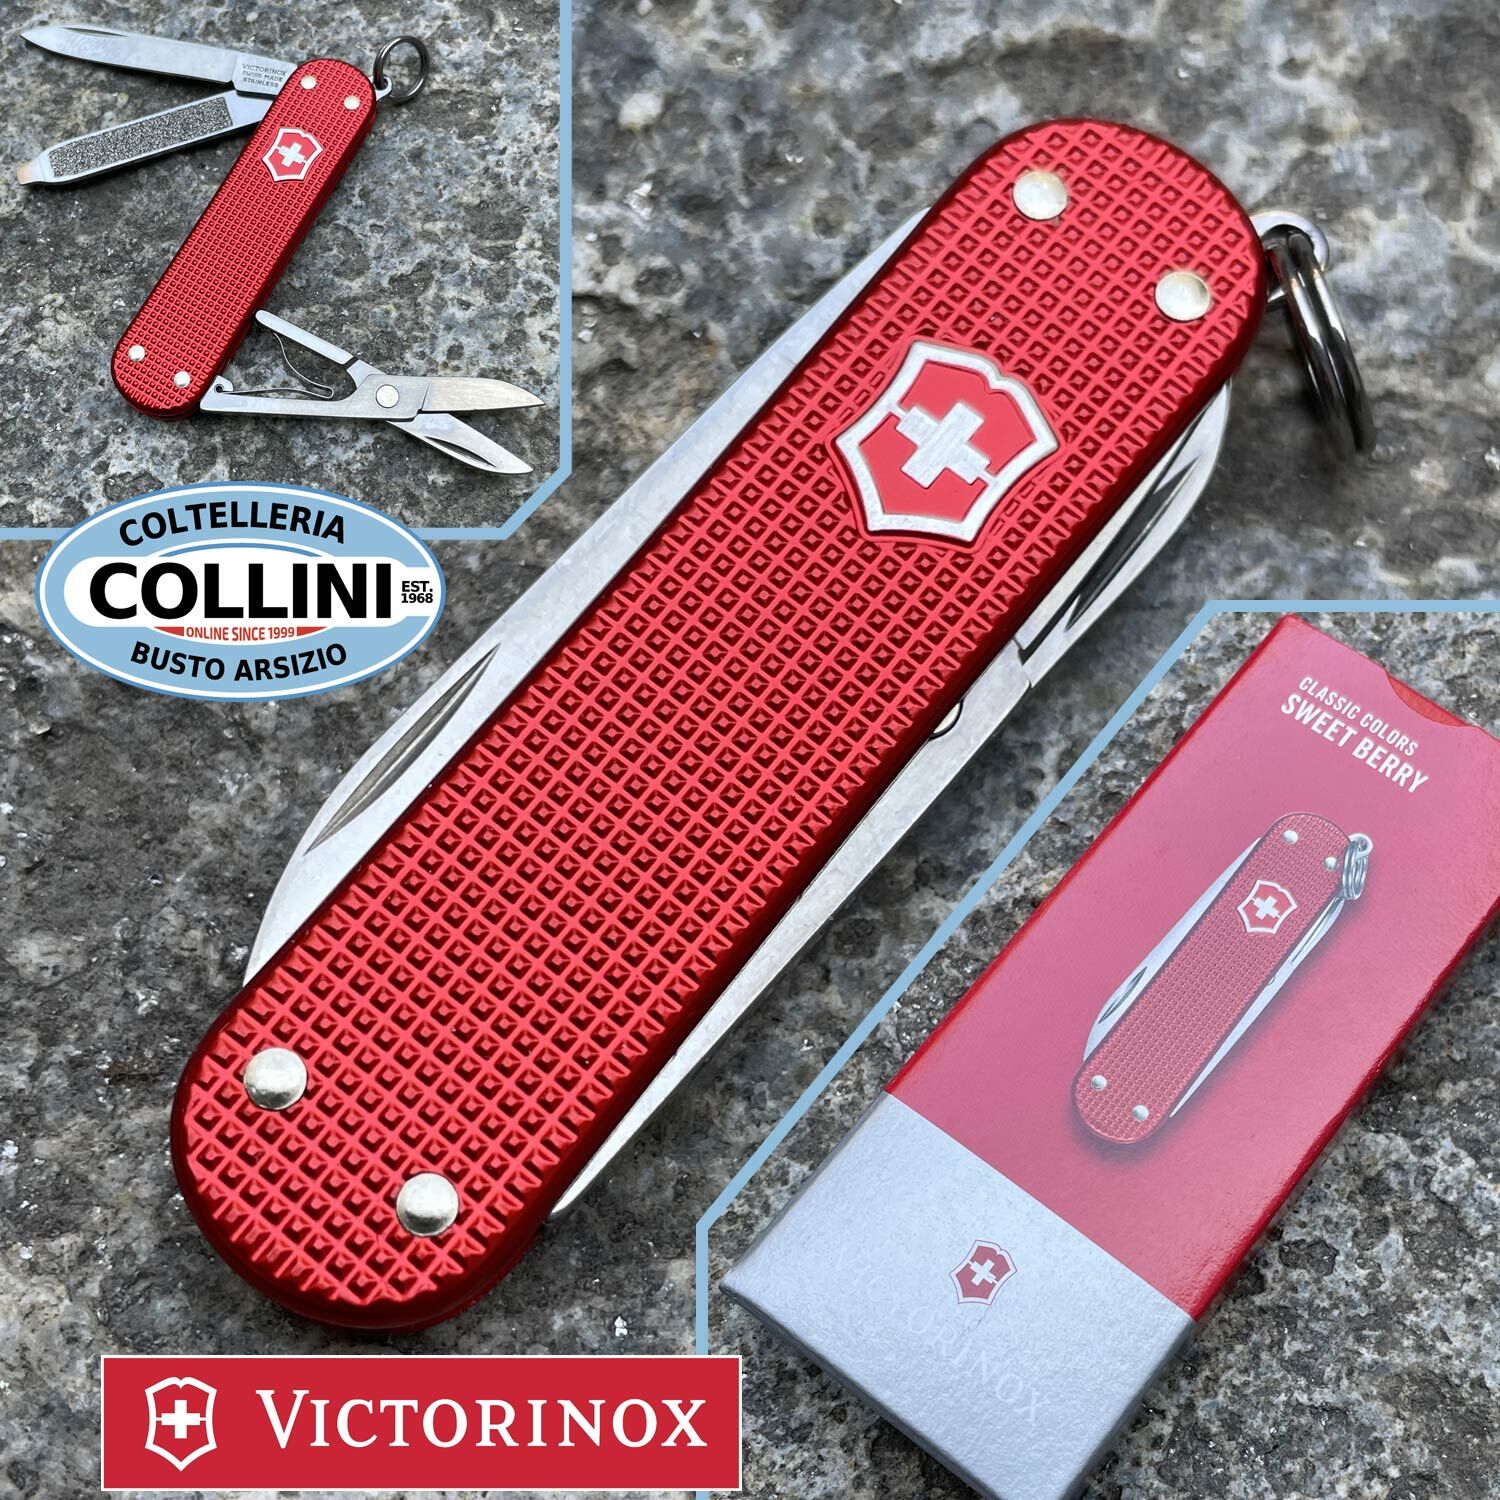 Victorinox - Sweet Berry - Alox Classic SD Colors 58mm - 0.6221.201G - couteau, messer, cuchillo